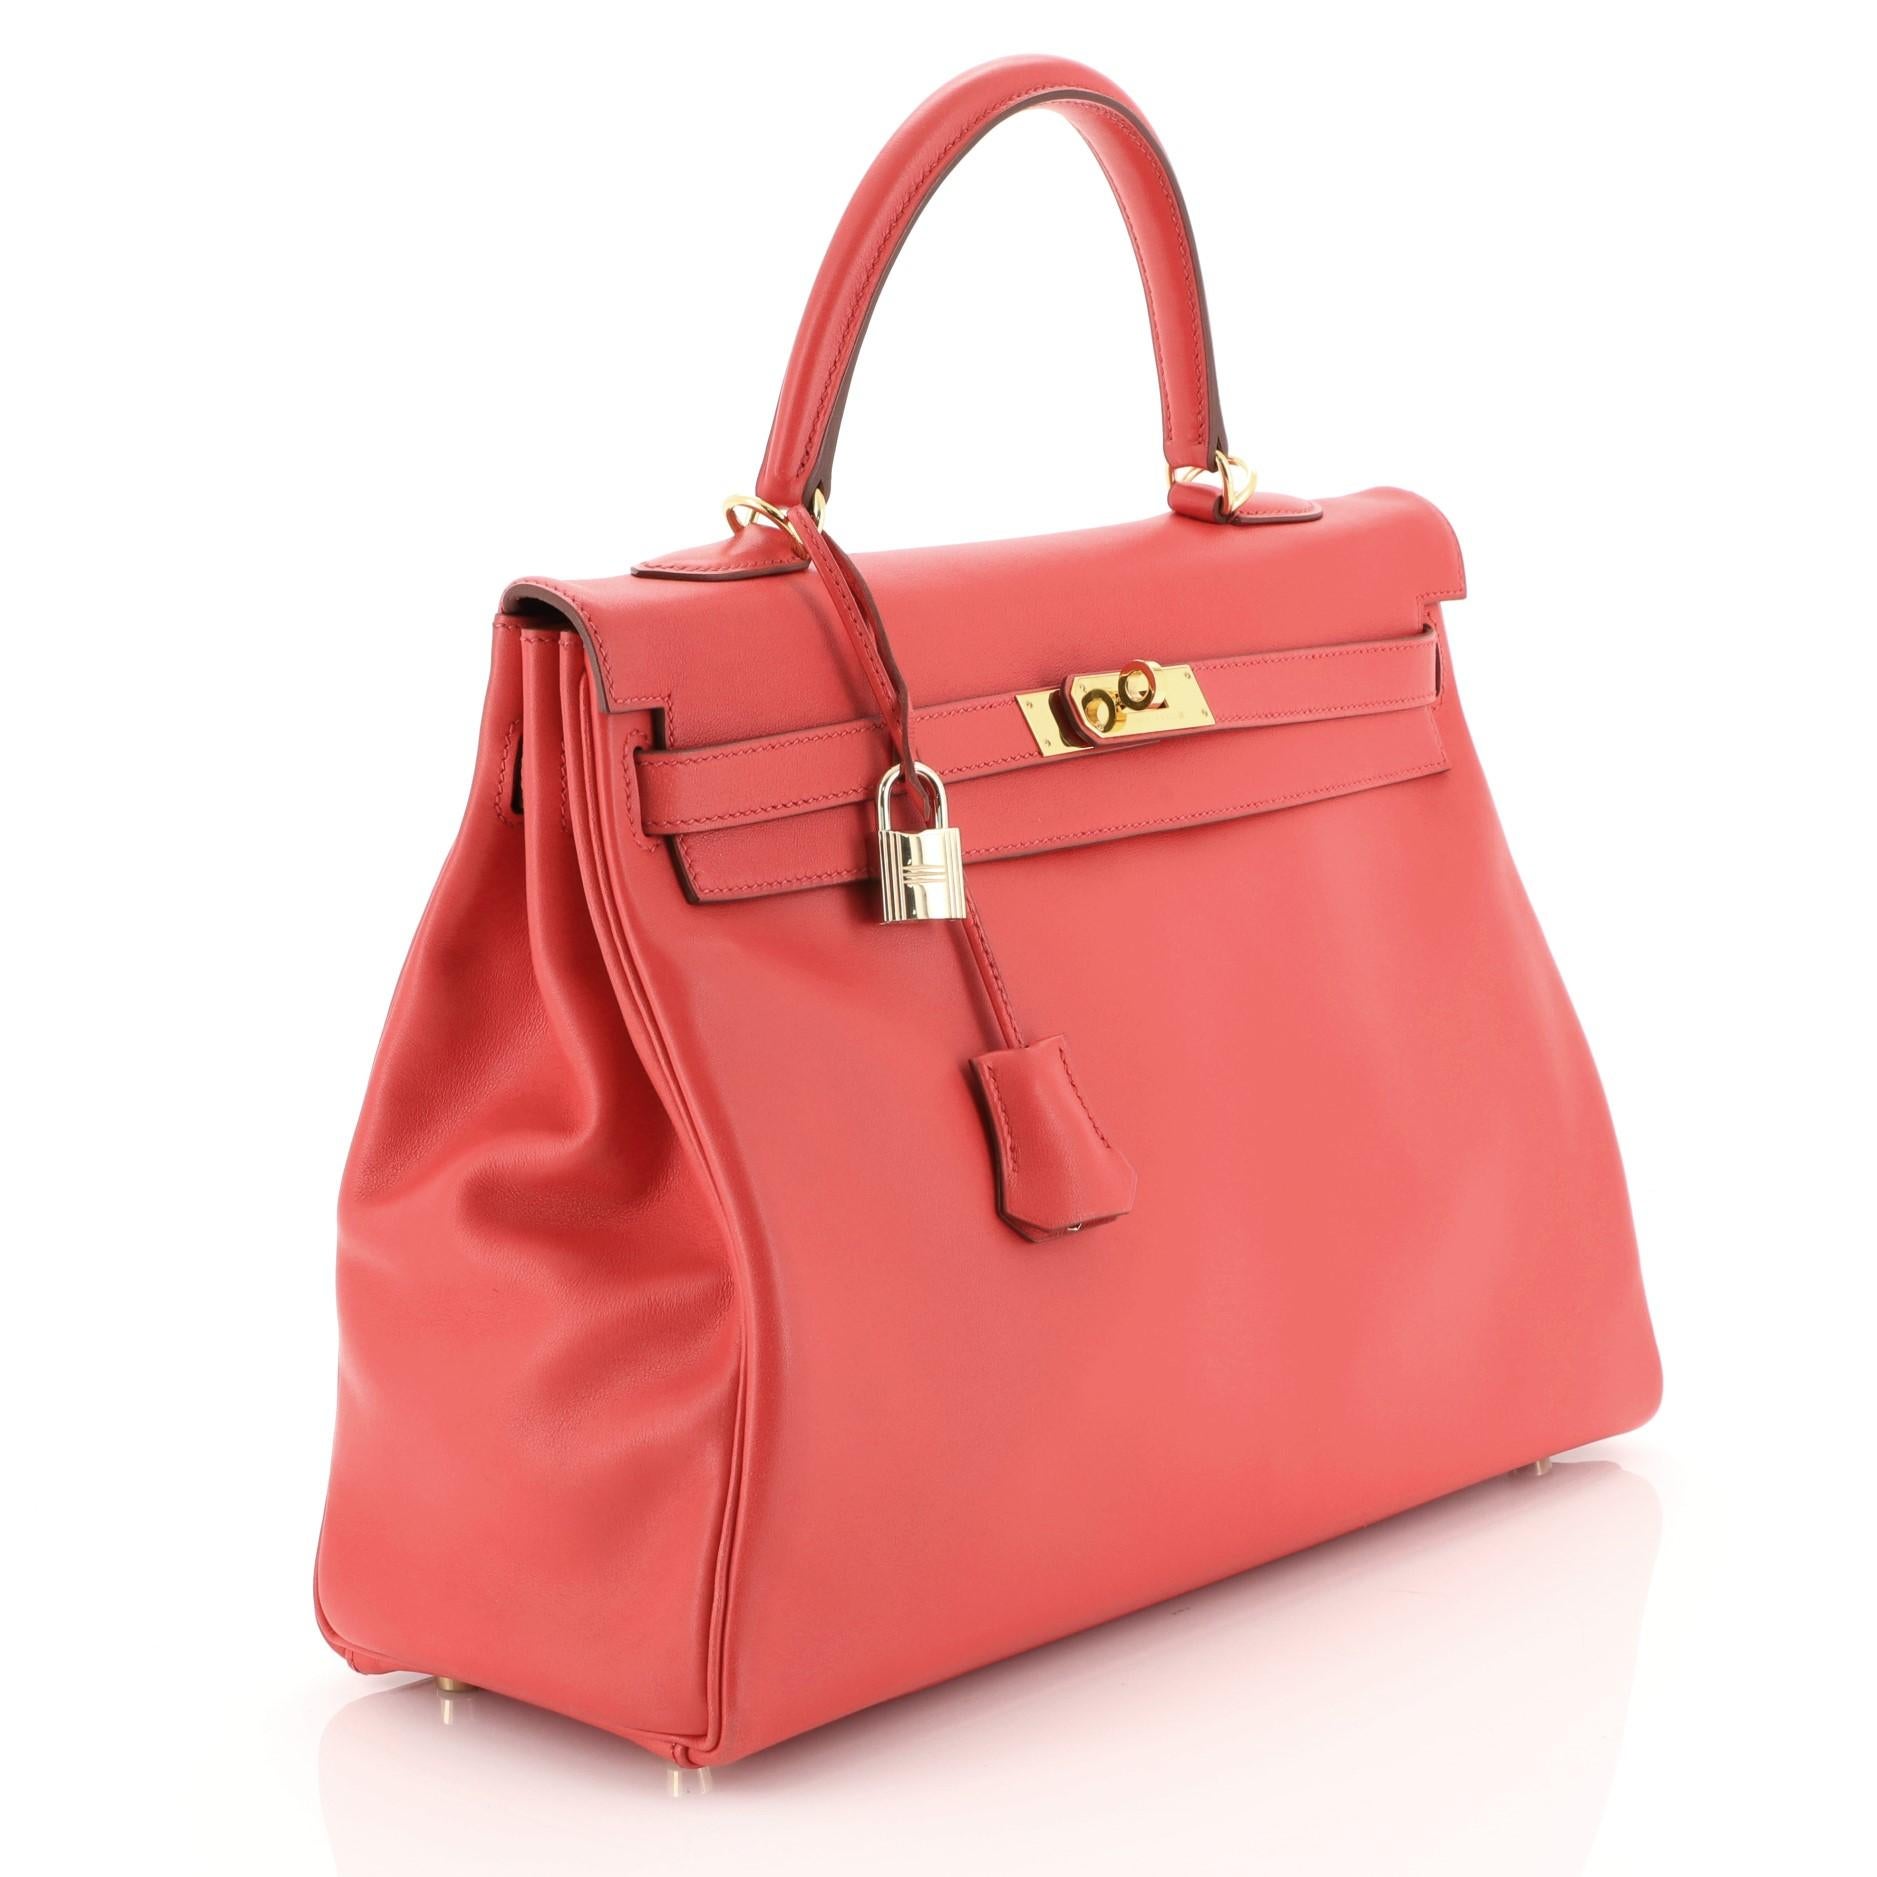 This Hermes Kelly Handbag Rouge Vif Gulliver with Gold Hardware 35, crafted in Rouge Vif red Gulliver leather, features a rolled top handle, protective base studs, and gold hardware. Its turn-lock closure opens to a Rouge Vif red Gulliver leather